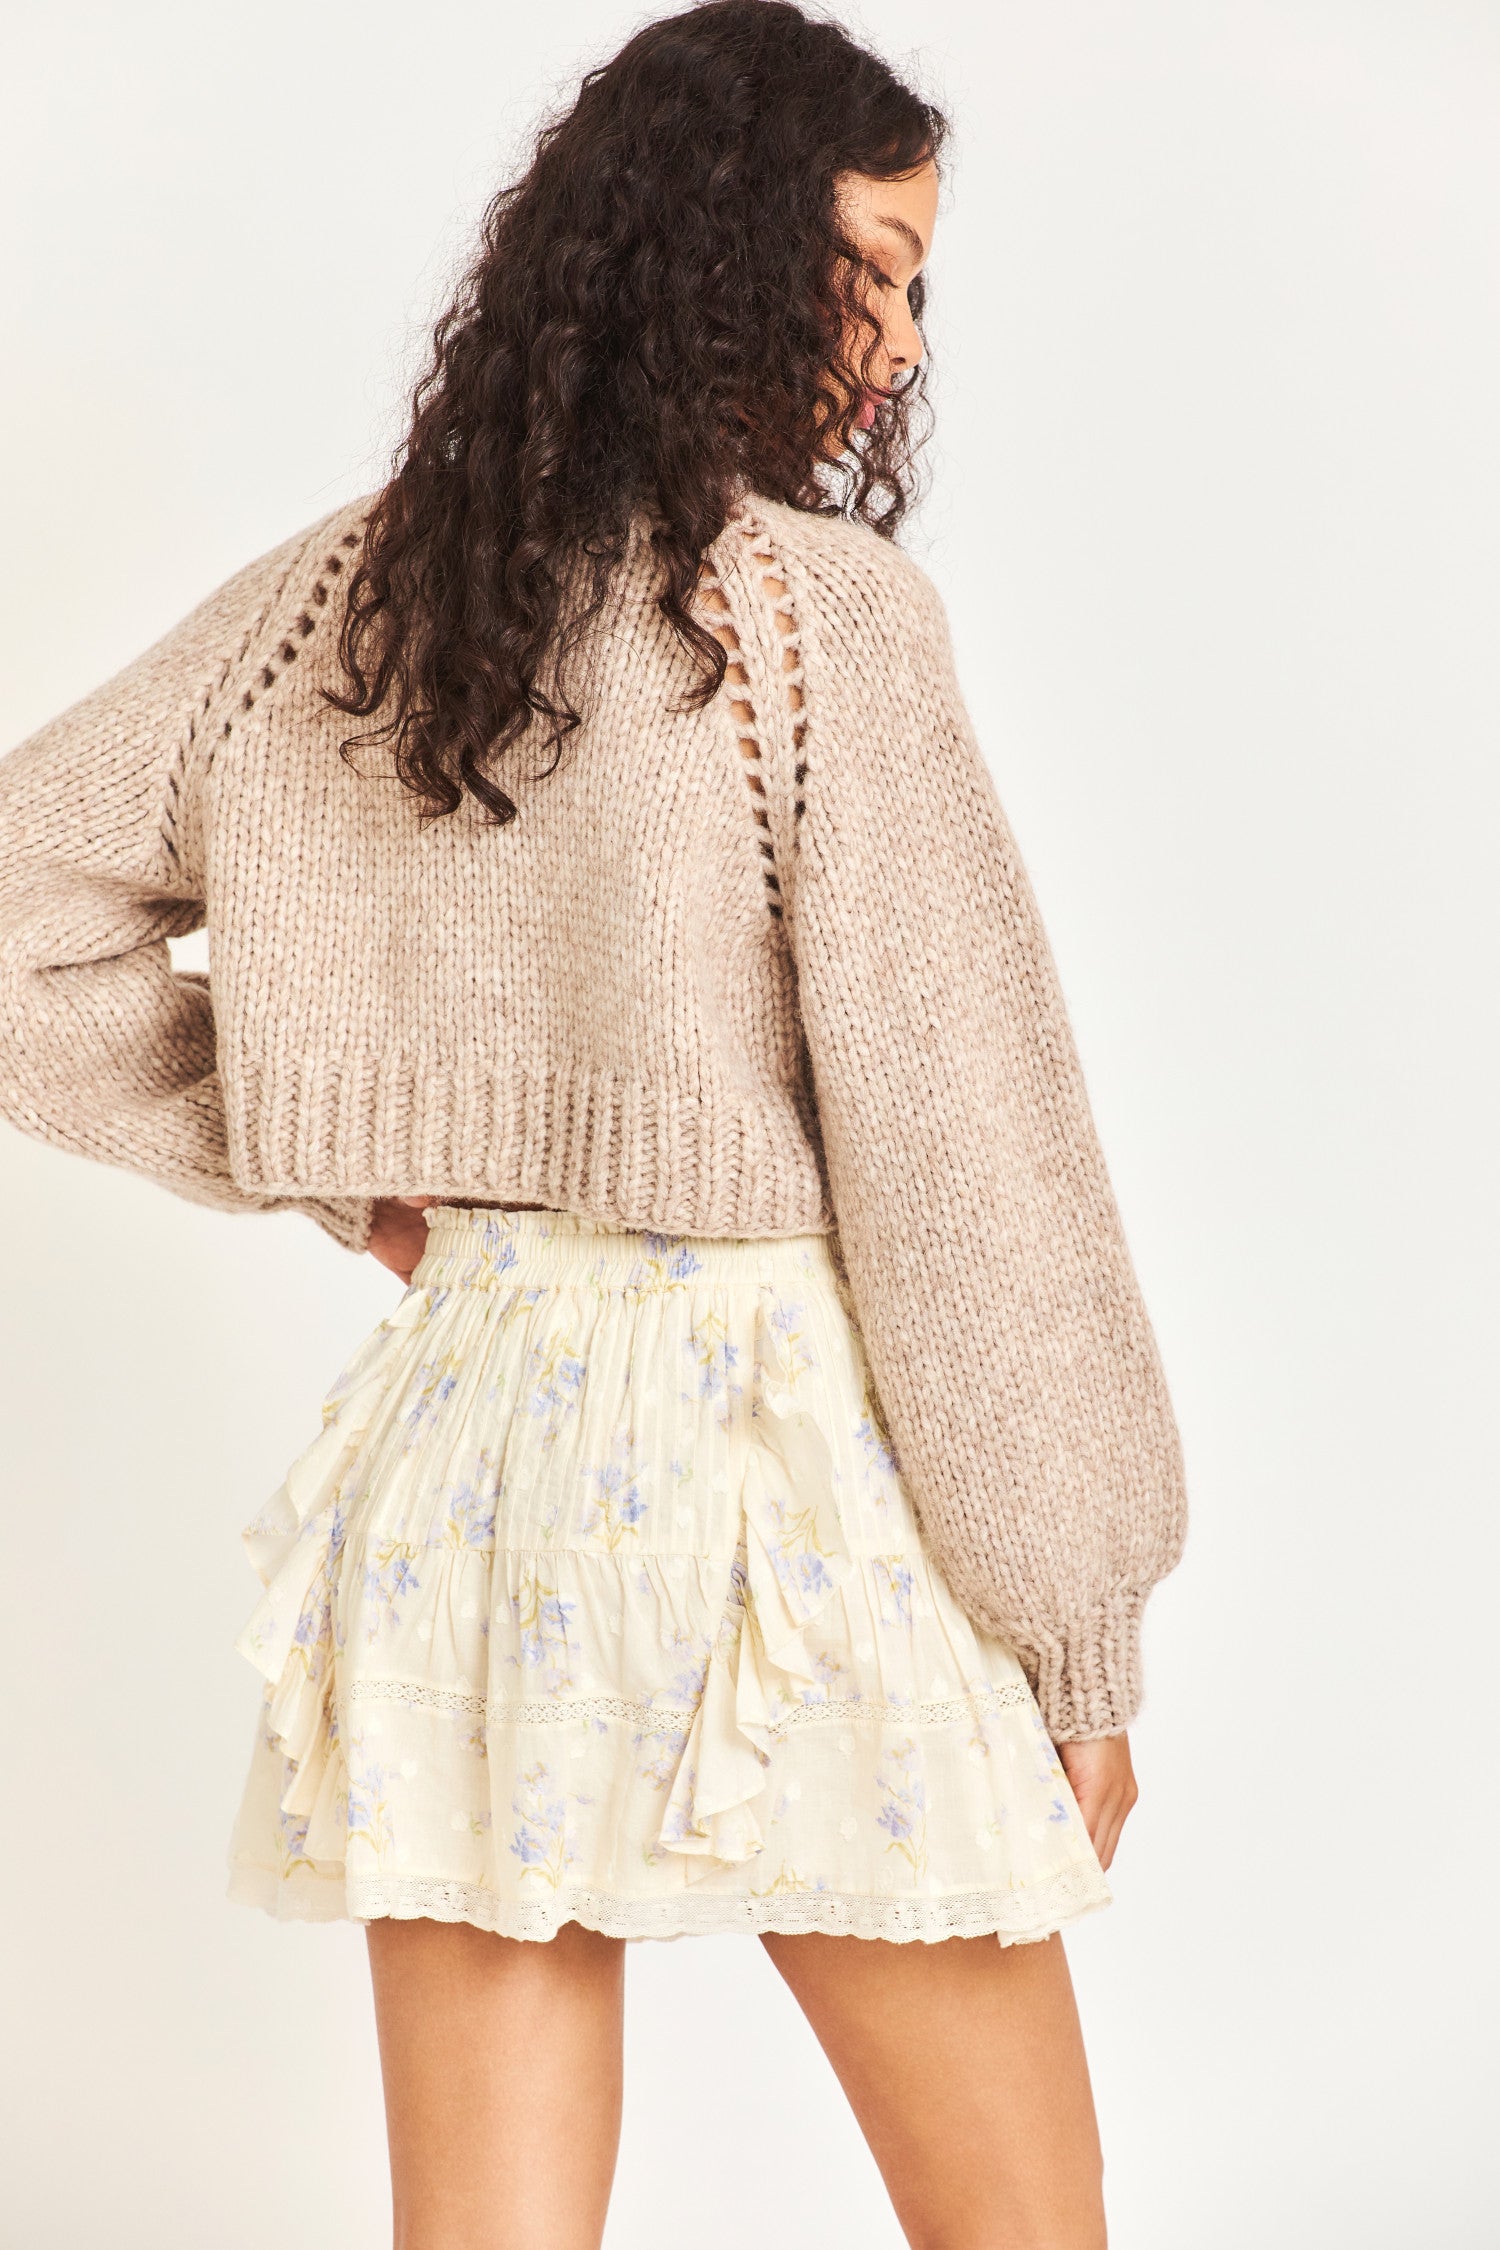 Knitted cropped sweater in a beautiful brown color featuring puffy sleeves for a comfortable feel as well as three buttons down the middle 